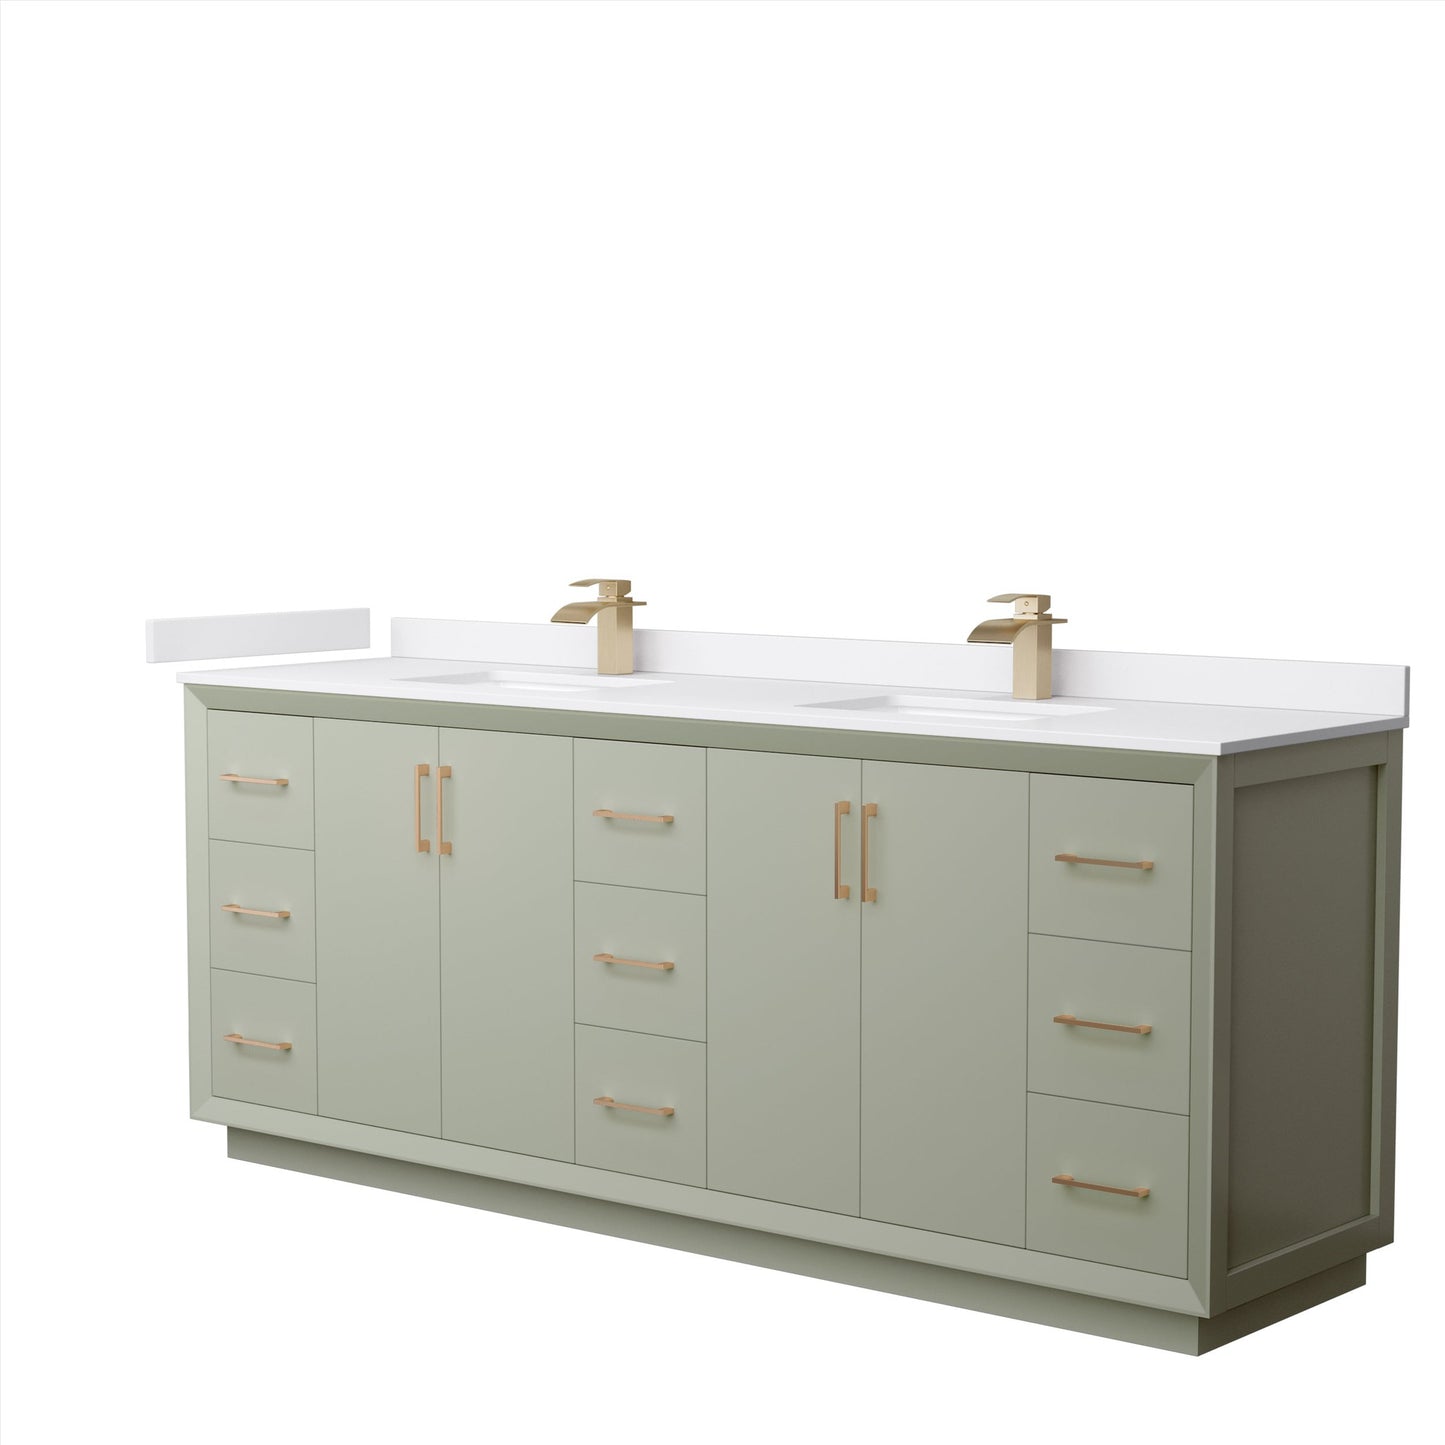 Wyndham Collection Strada 84" Double Bathroom Vanity in Light Green, White Cultured Marble Countertop, Undermount Square Sinks, Satin Bronze Trim